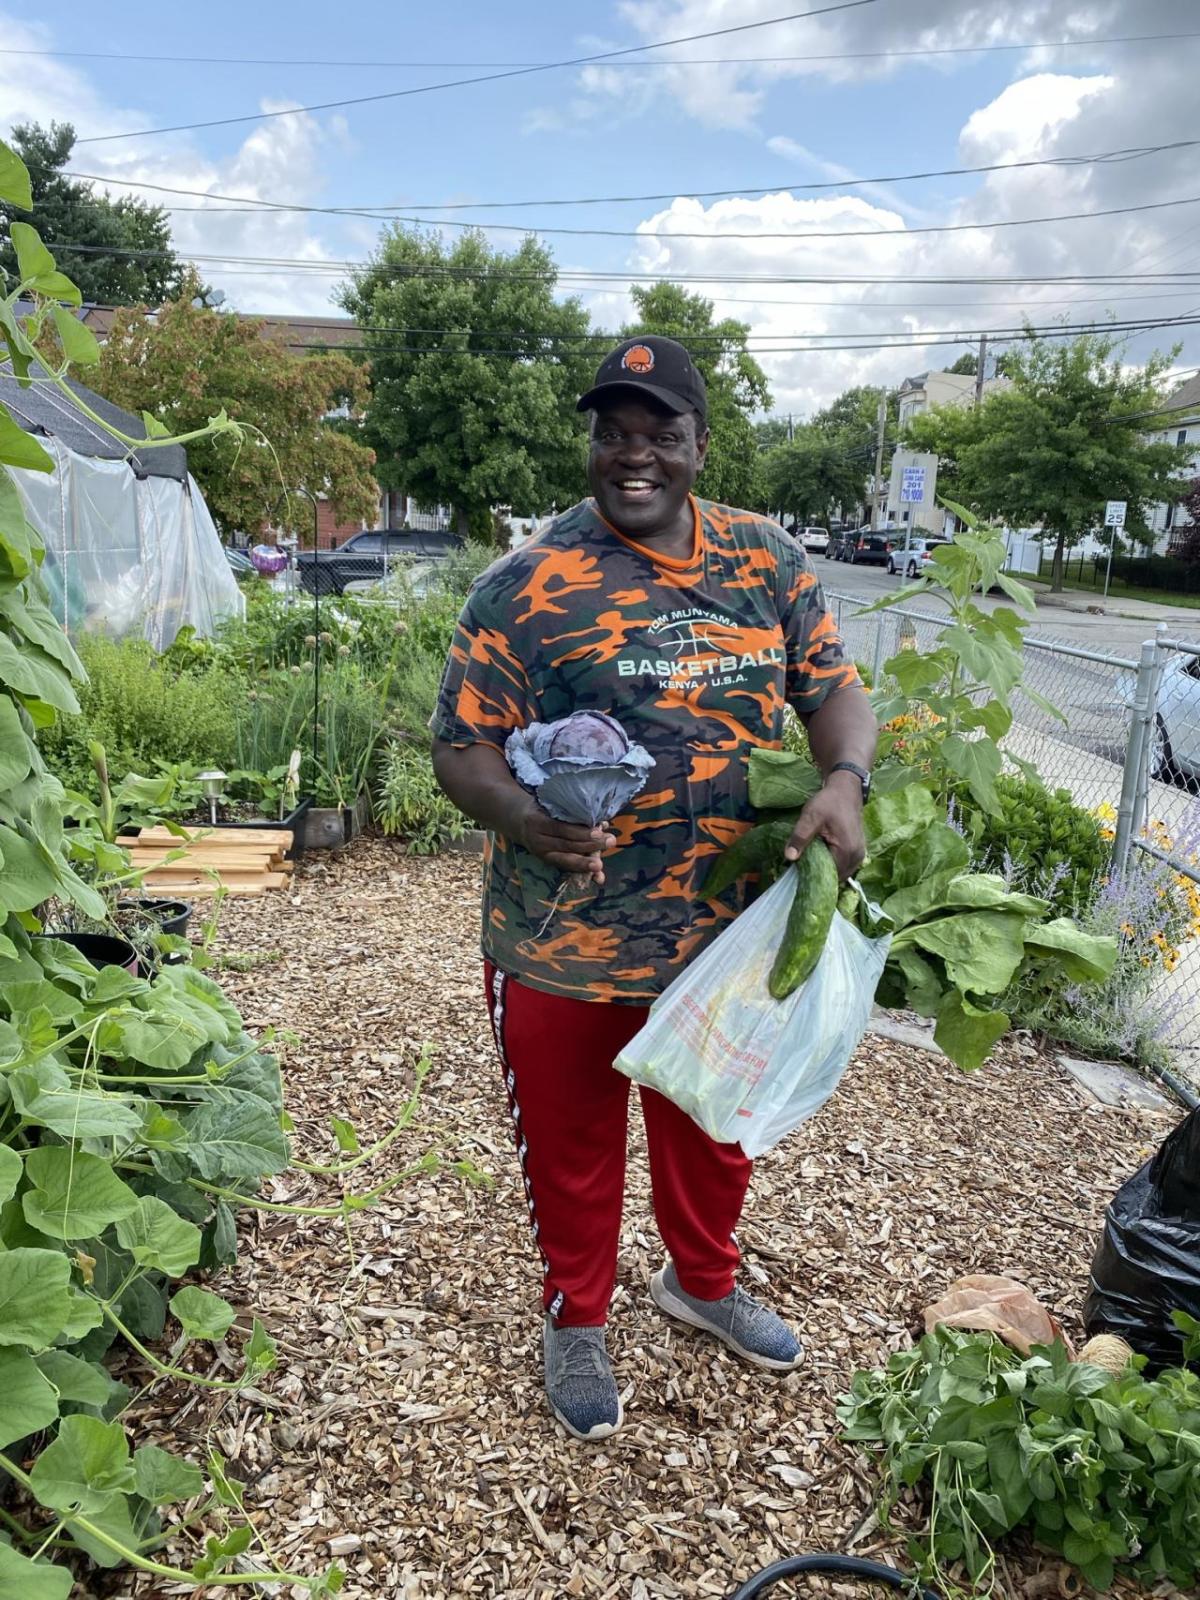 A person holding fresh produce, smiling. They're standing on a mulch path in a garden, a car goes by on the street next to them.